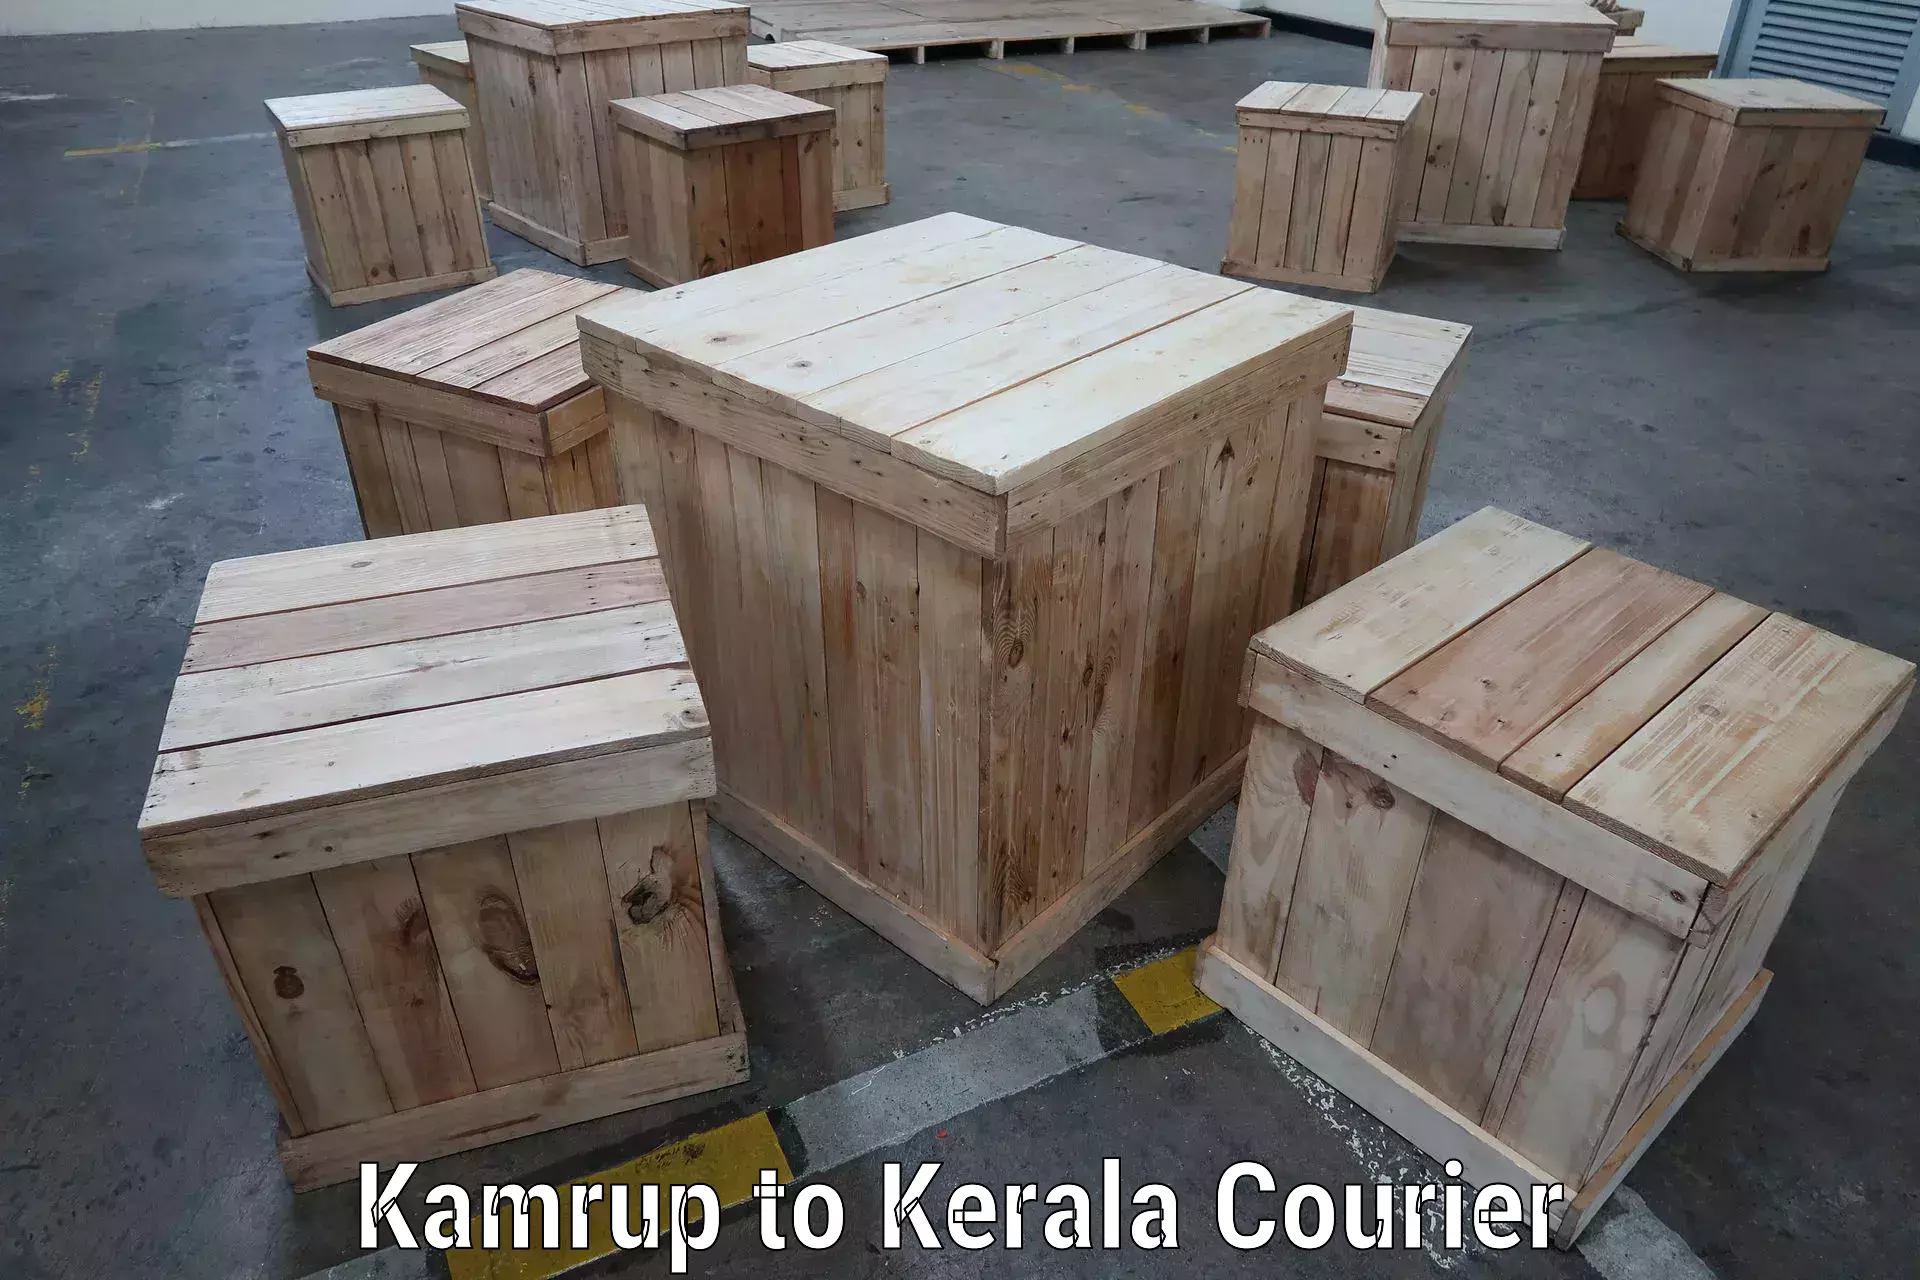 Express delivery capabilities Kamrup to Kerala